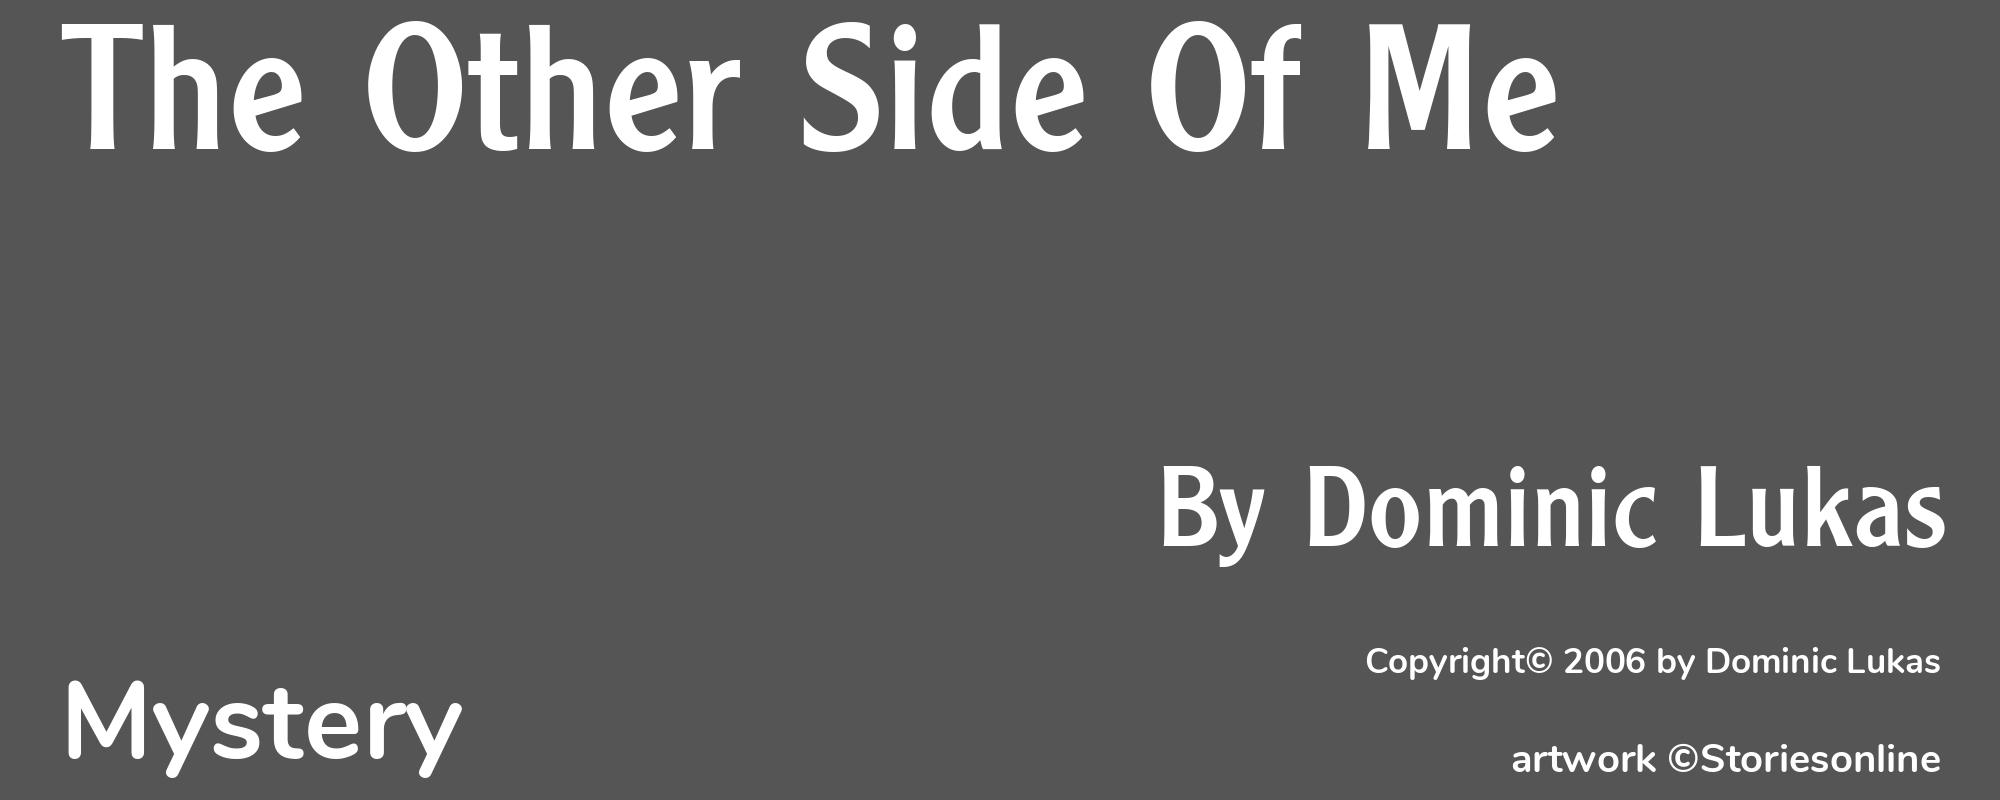 The Other Side Of Me - Cover